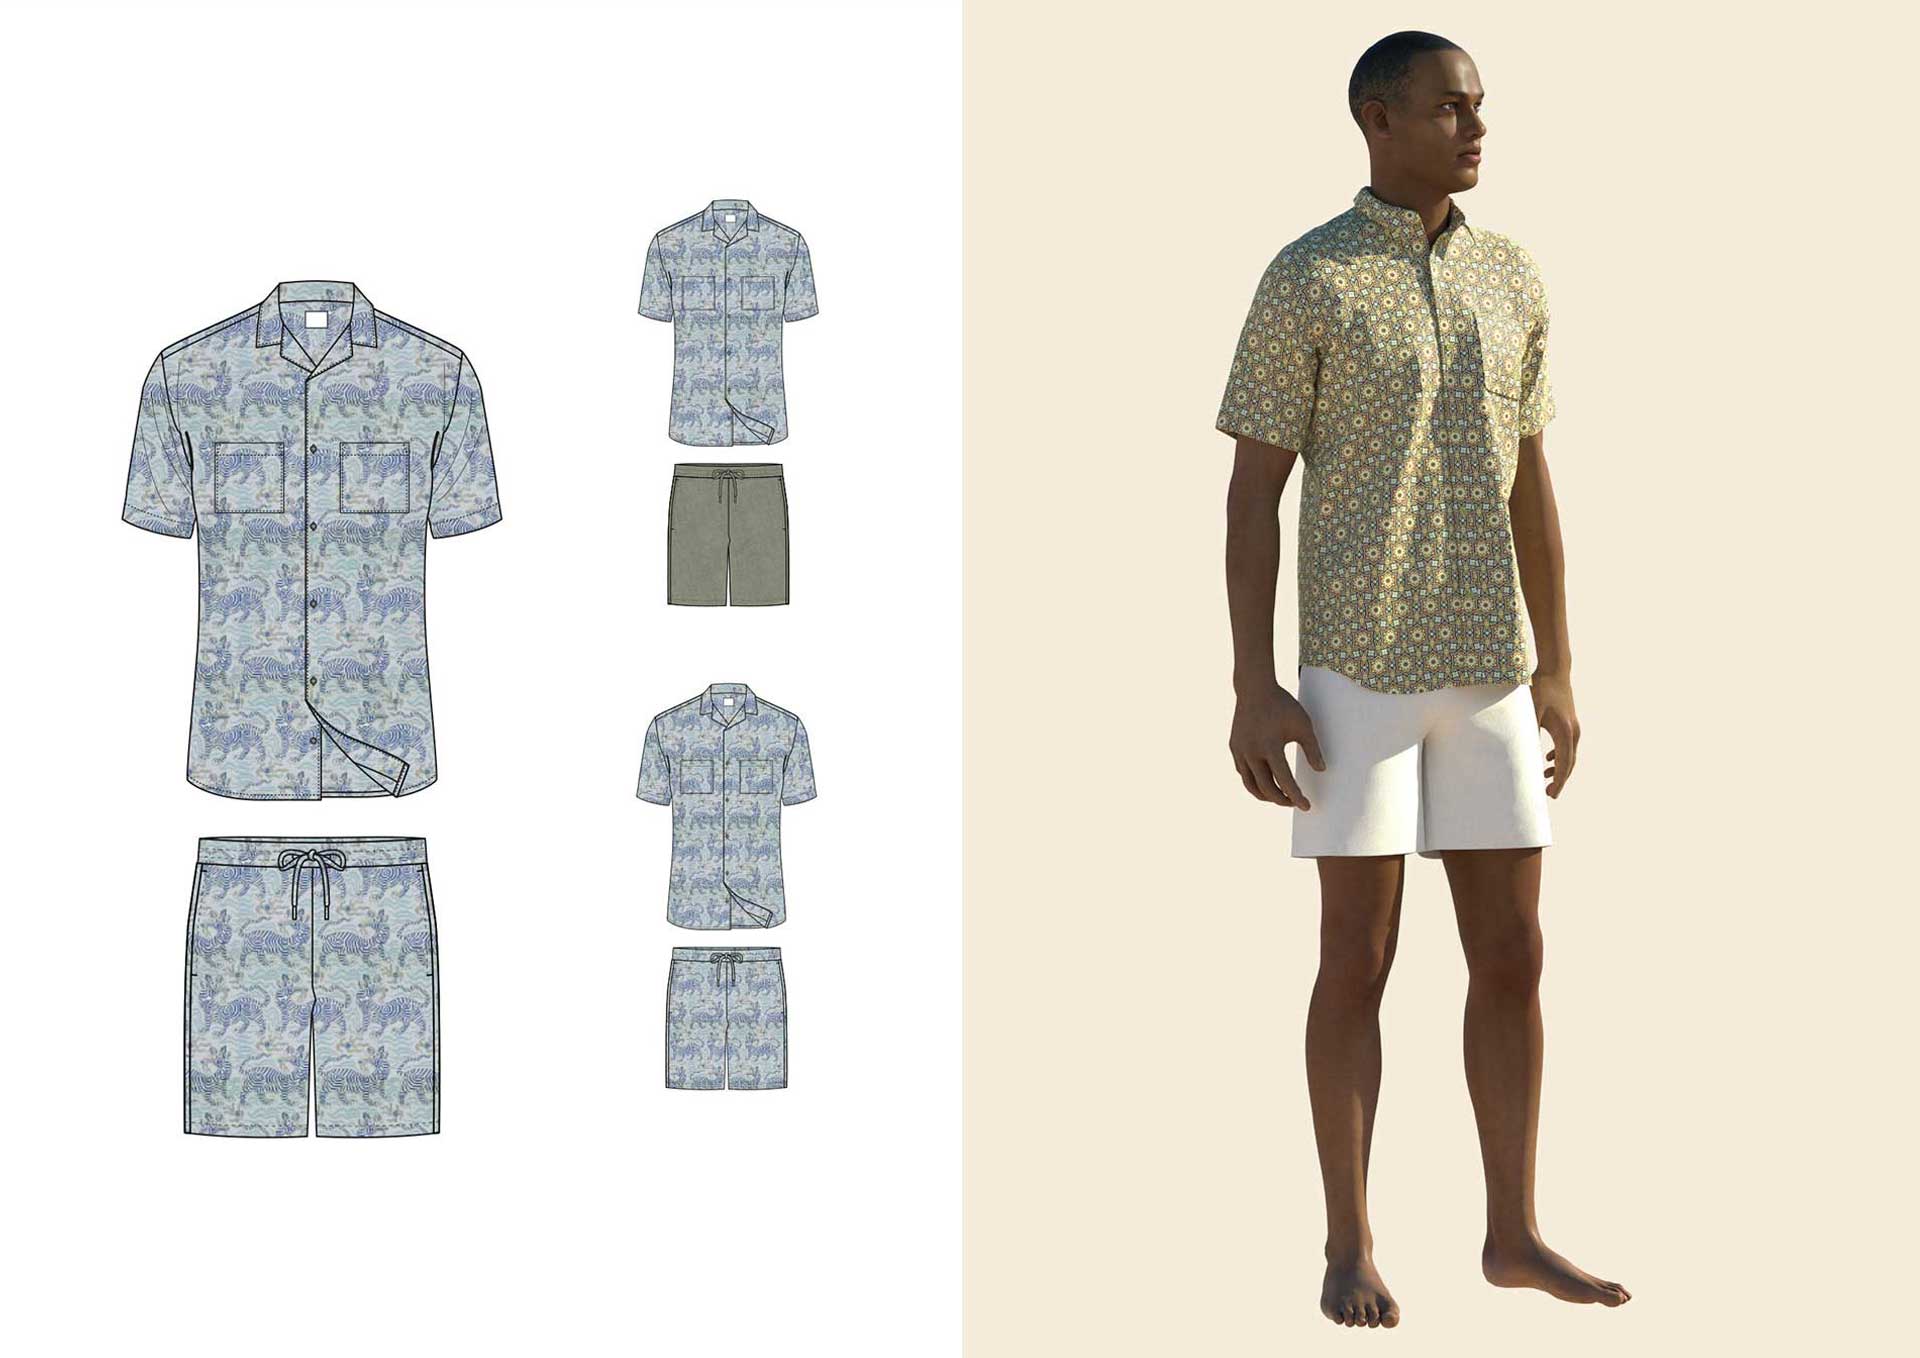 fashion-illustration-of-african-american-men-with-ethic-shirt-and-white-short